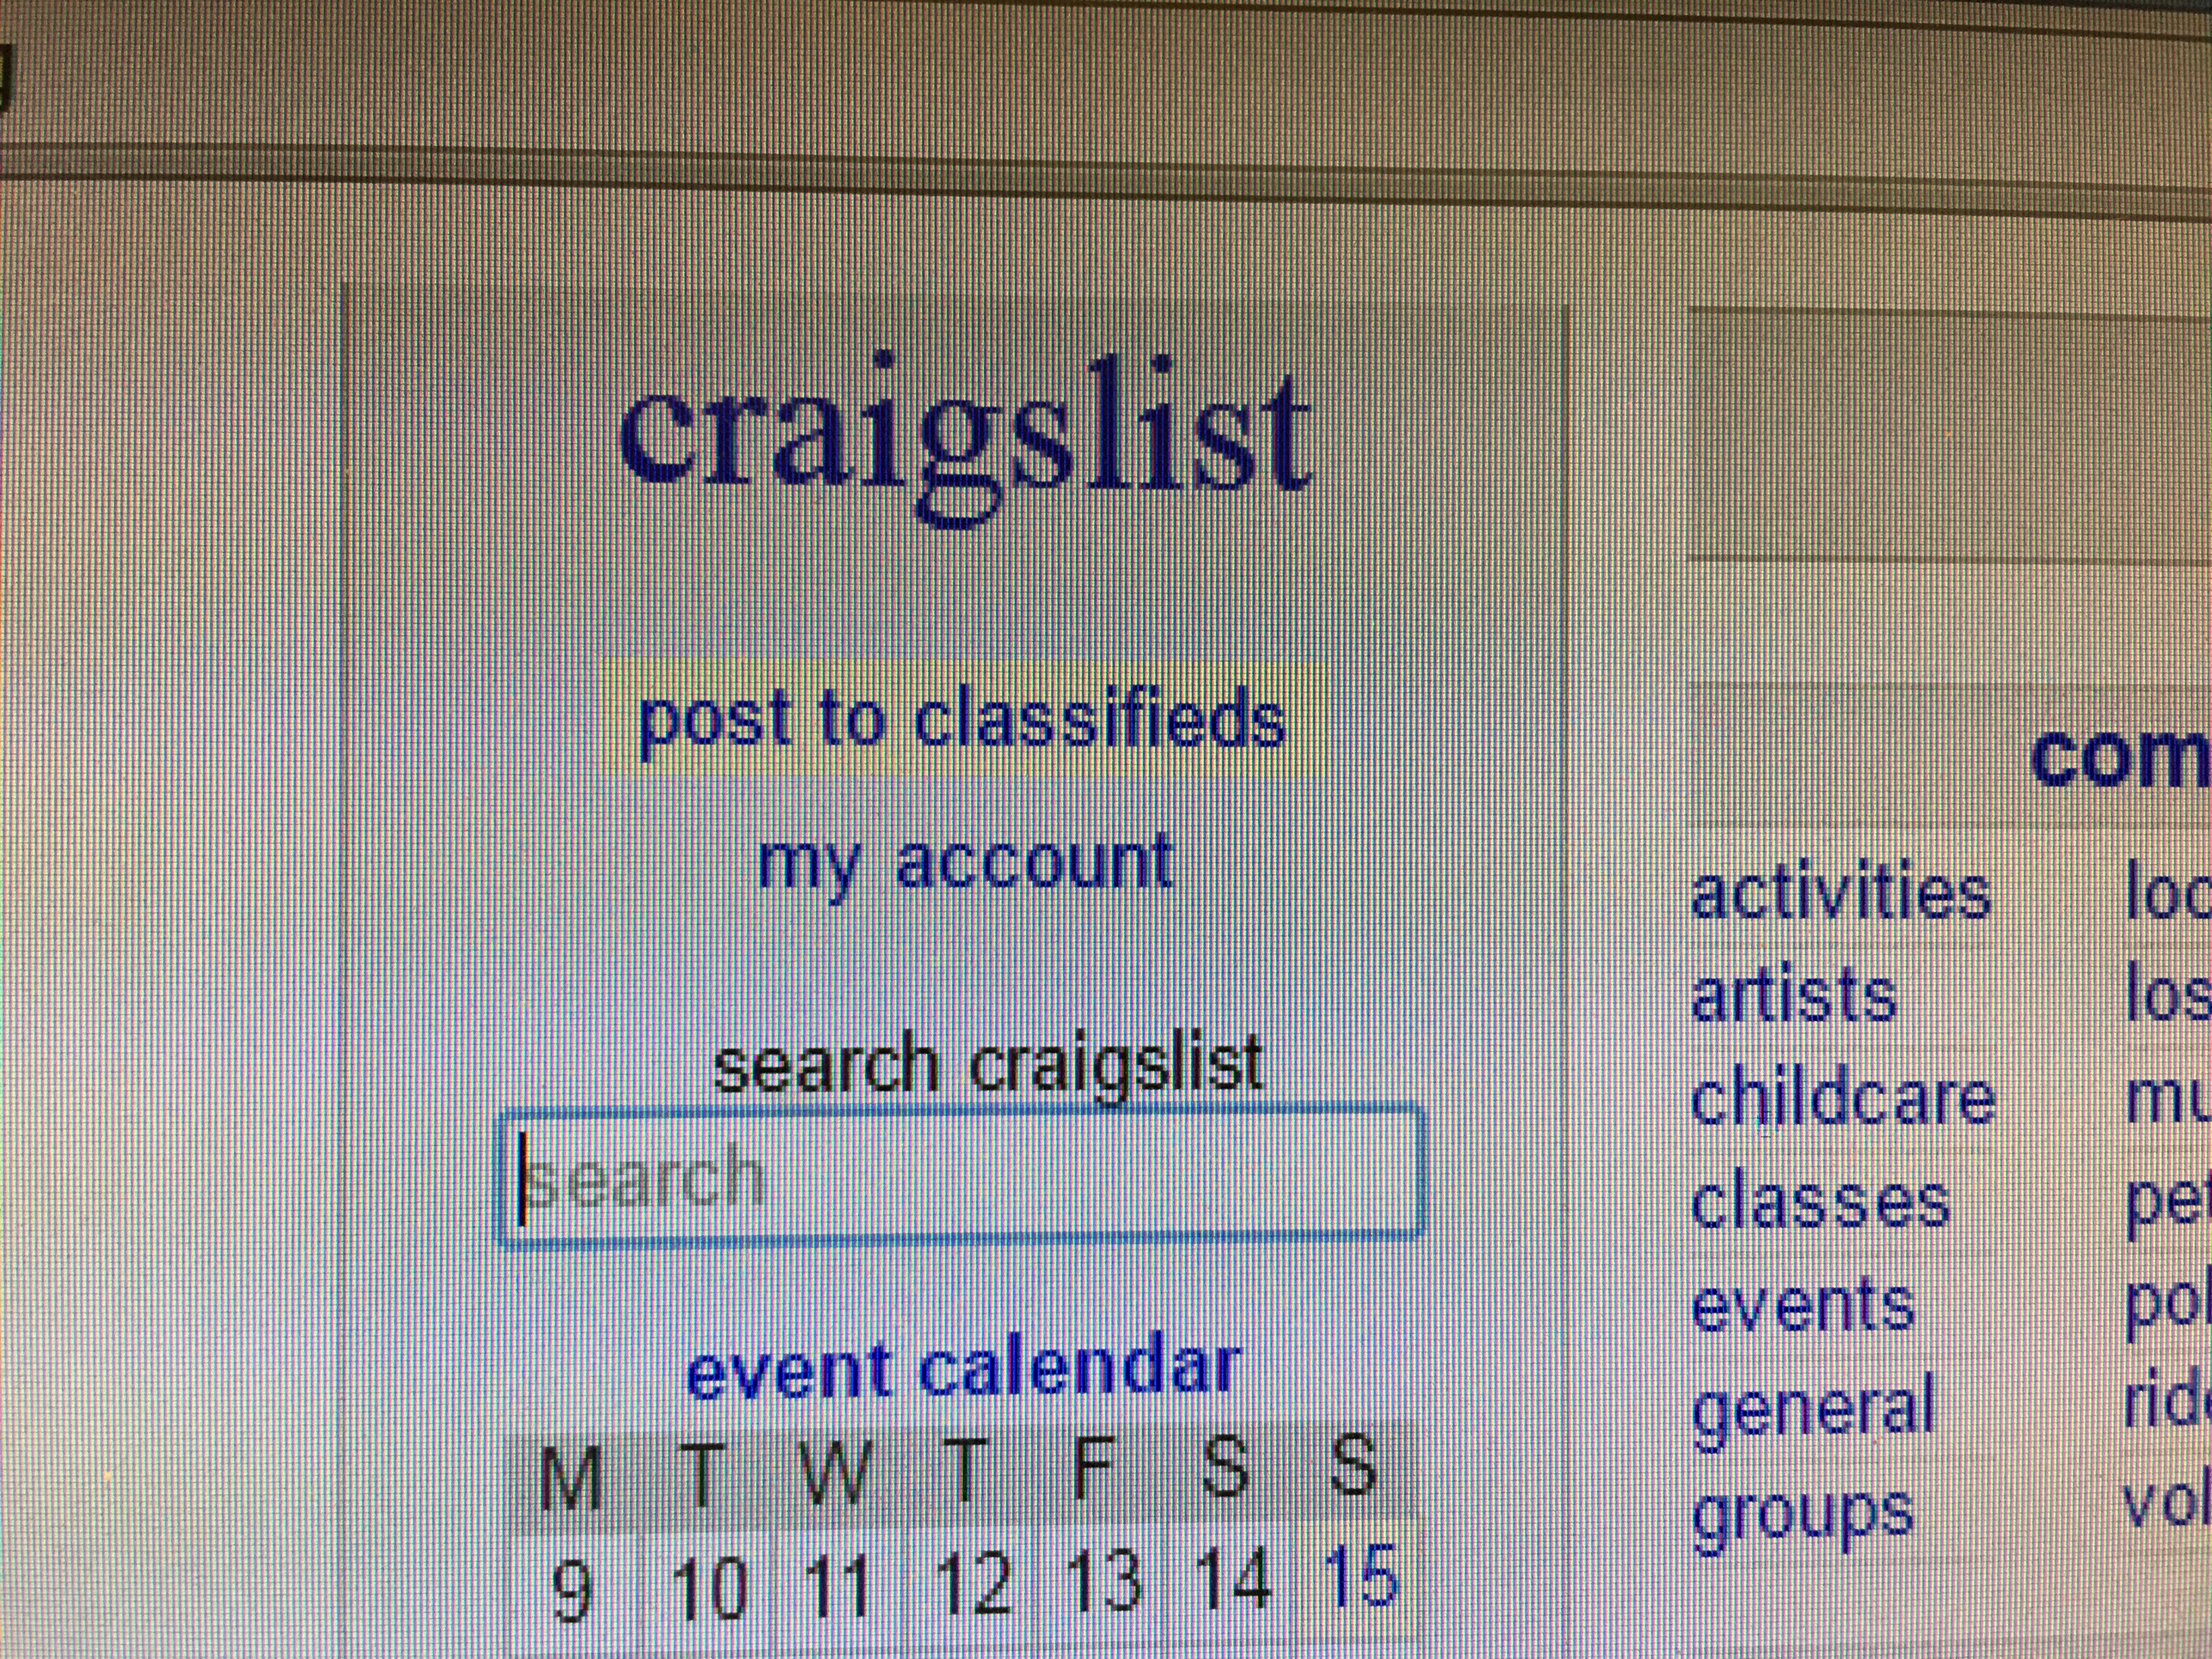 Craigslist Shuts Down Its Personals Section - CBS Philly